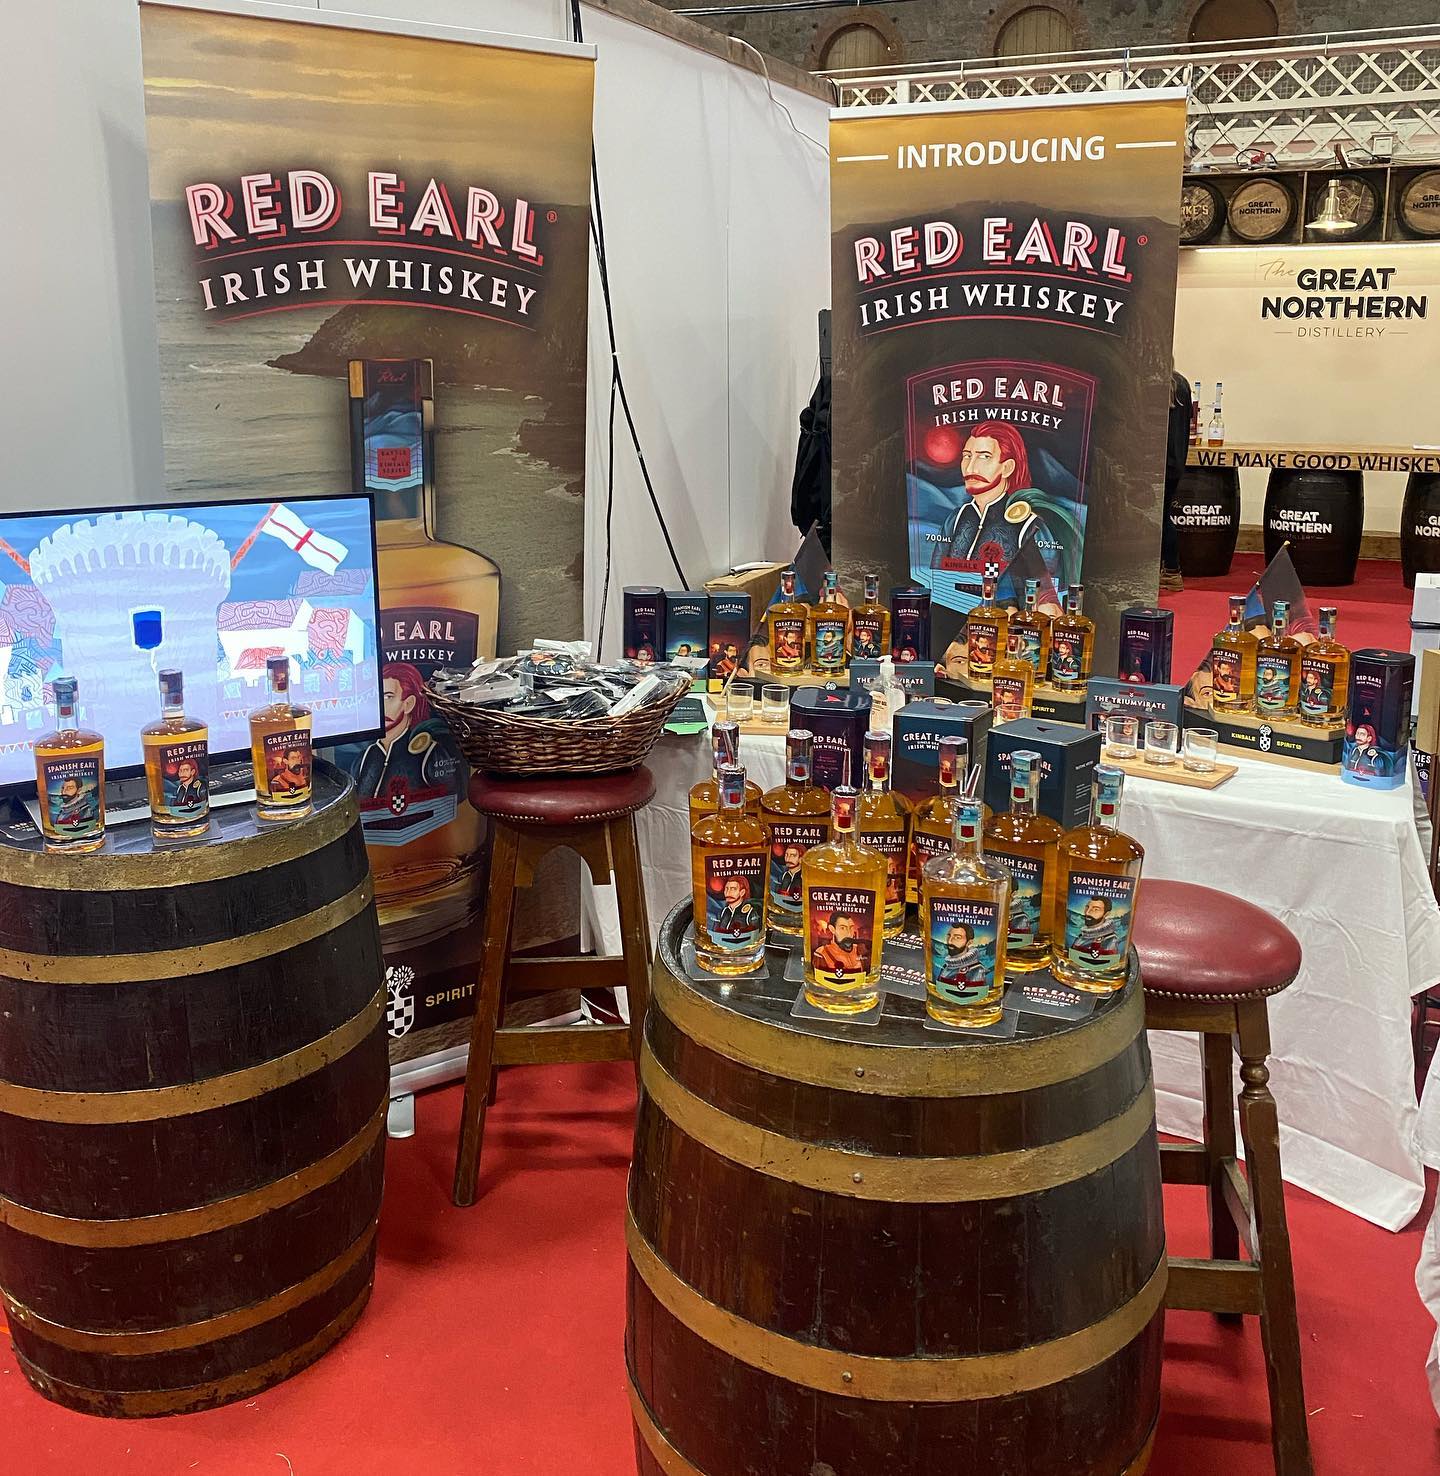 🍀🥃 Are you heading to @whiskeylivedub this weekend? Pop by our Kinsale Spirit Co. Stand No. 67 and sample some of our multi-award winning whiskeys from our Battle of Kinsale series. 

🥃 Red Earl Irish Whiskey #blended 
🥃 Great Earl Irish Whiskey #singlegrain
🥃 Spanish Earl Irish Whiskey #singlemalt 

#whiskeylivedublin #whiskeylivedublin2022
#drinkresponsibly #irishwhiskey #whiskey